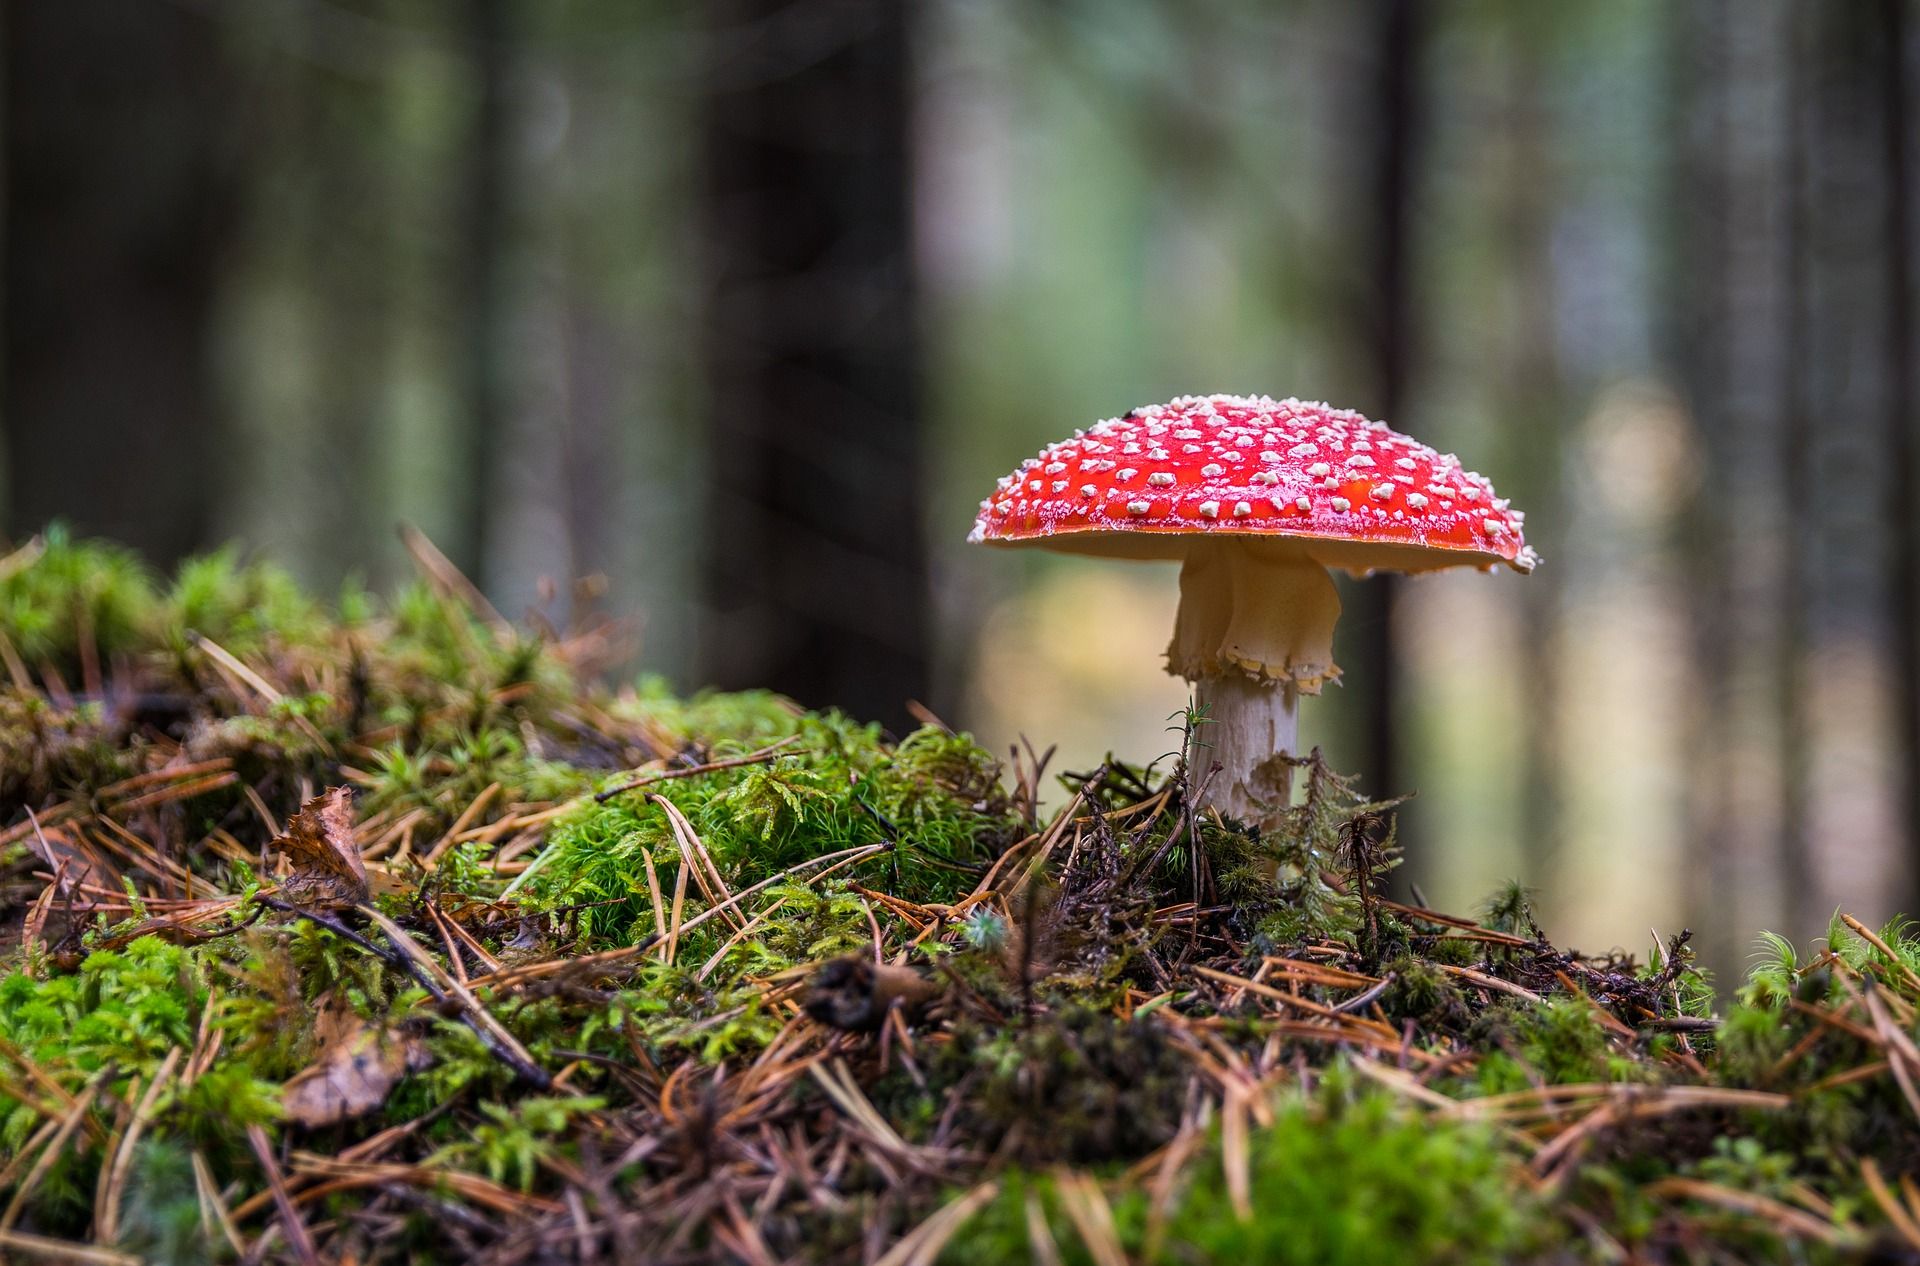 Newly discovered species of toadstool can eat insects alive